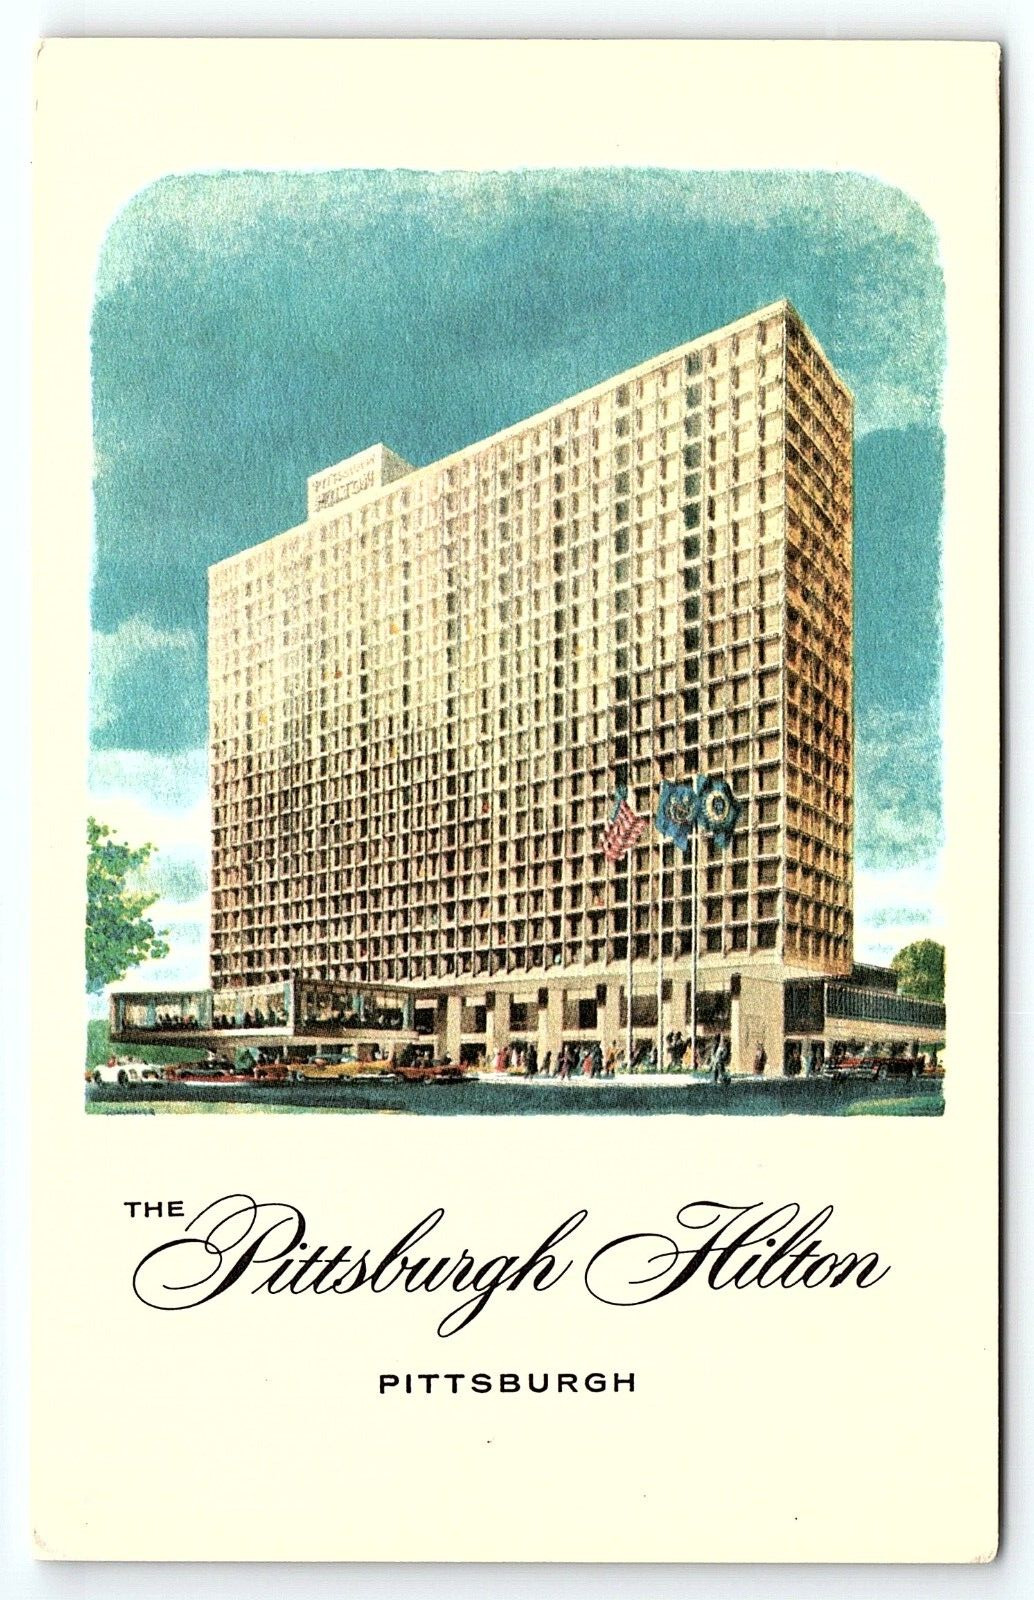 1950s PITTSBURGH PA THE PITTSBURGH HILTON HOTEL GOLDEN TRIANGLE POSTCARD P2139